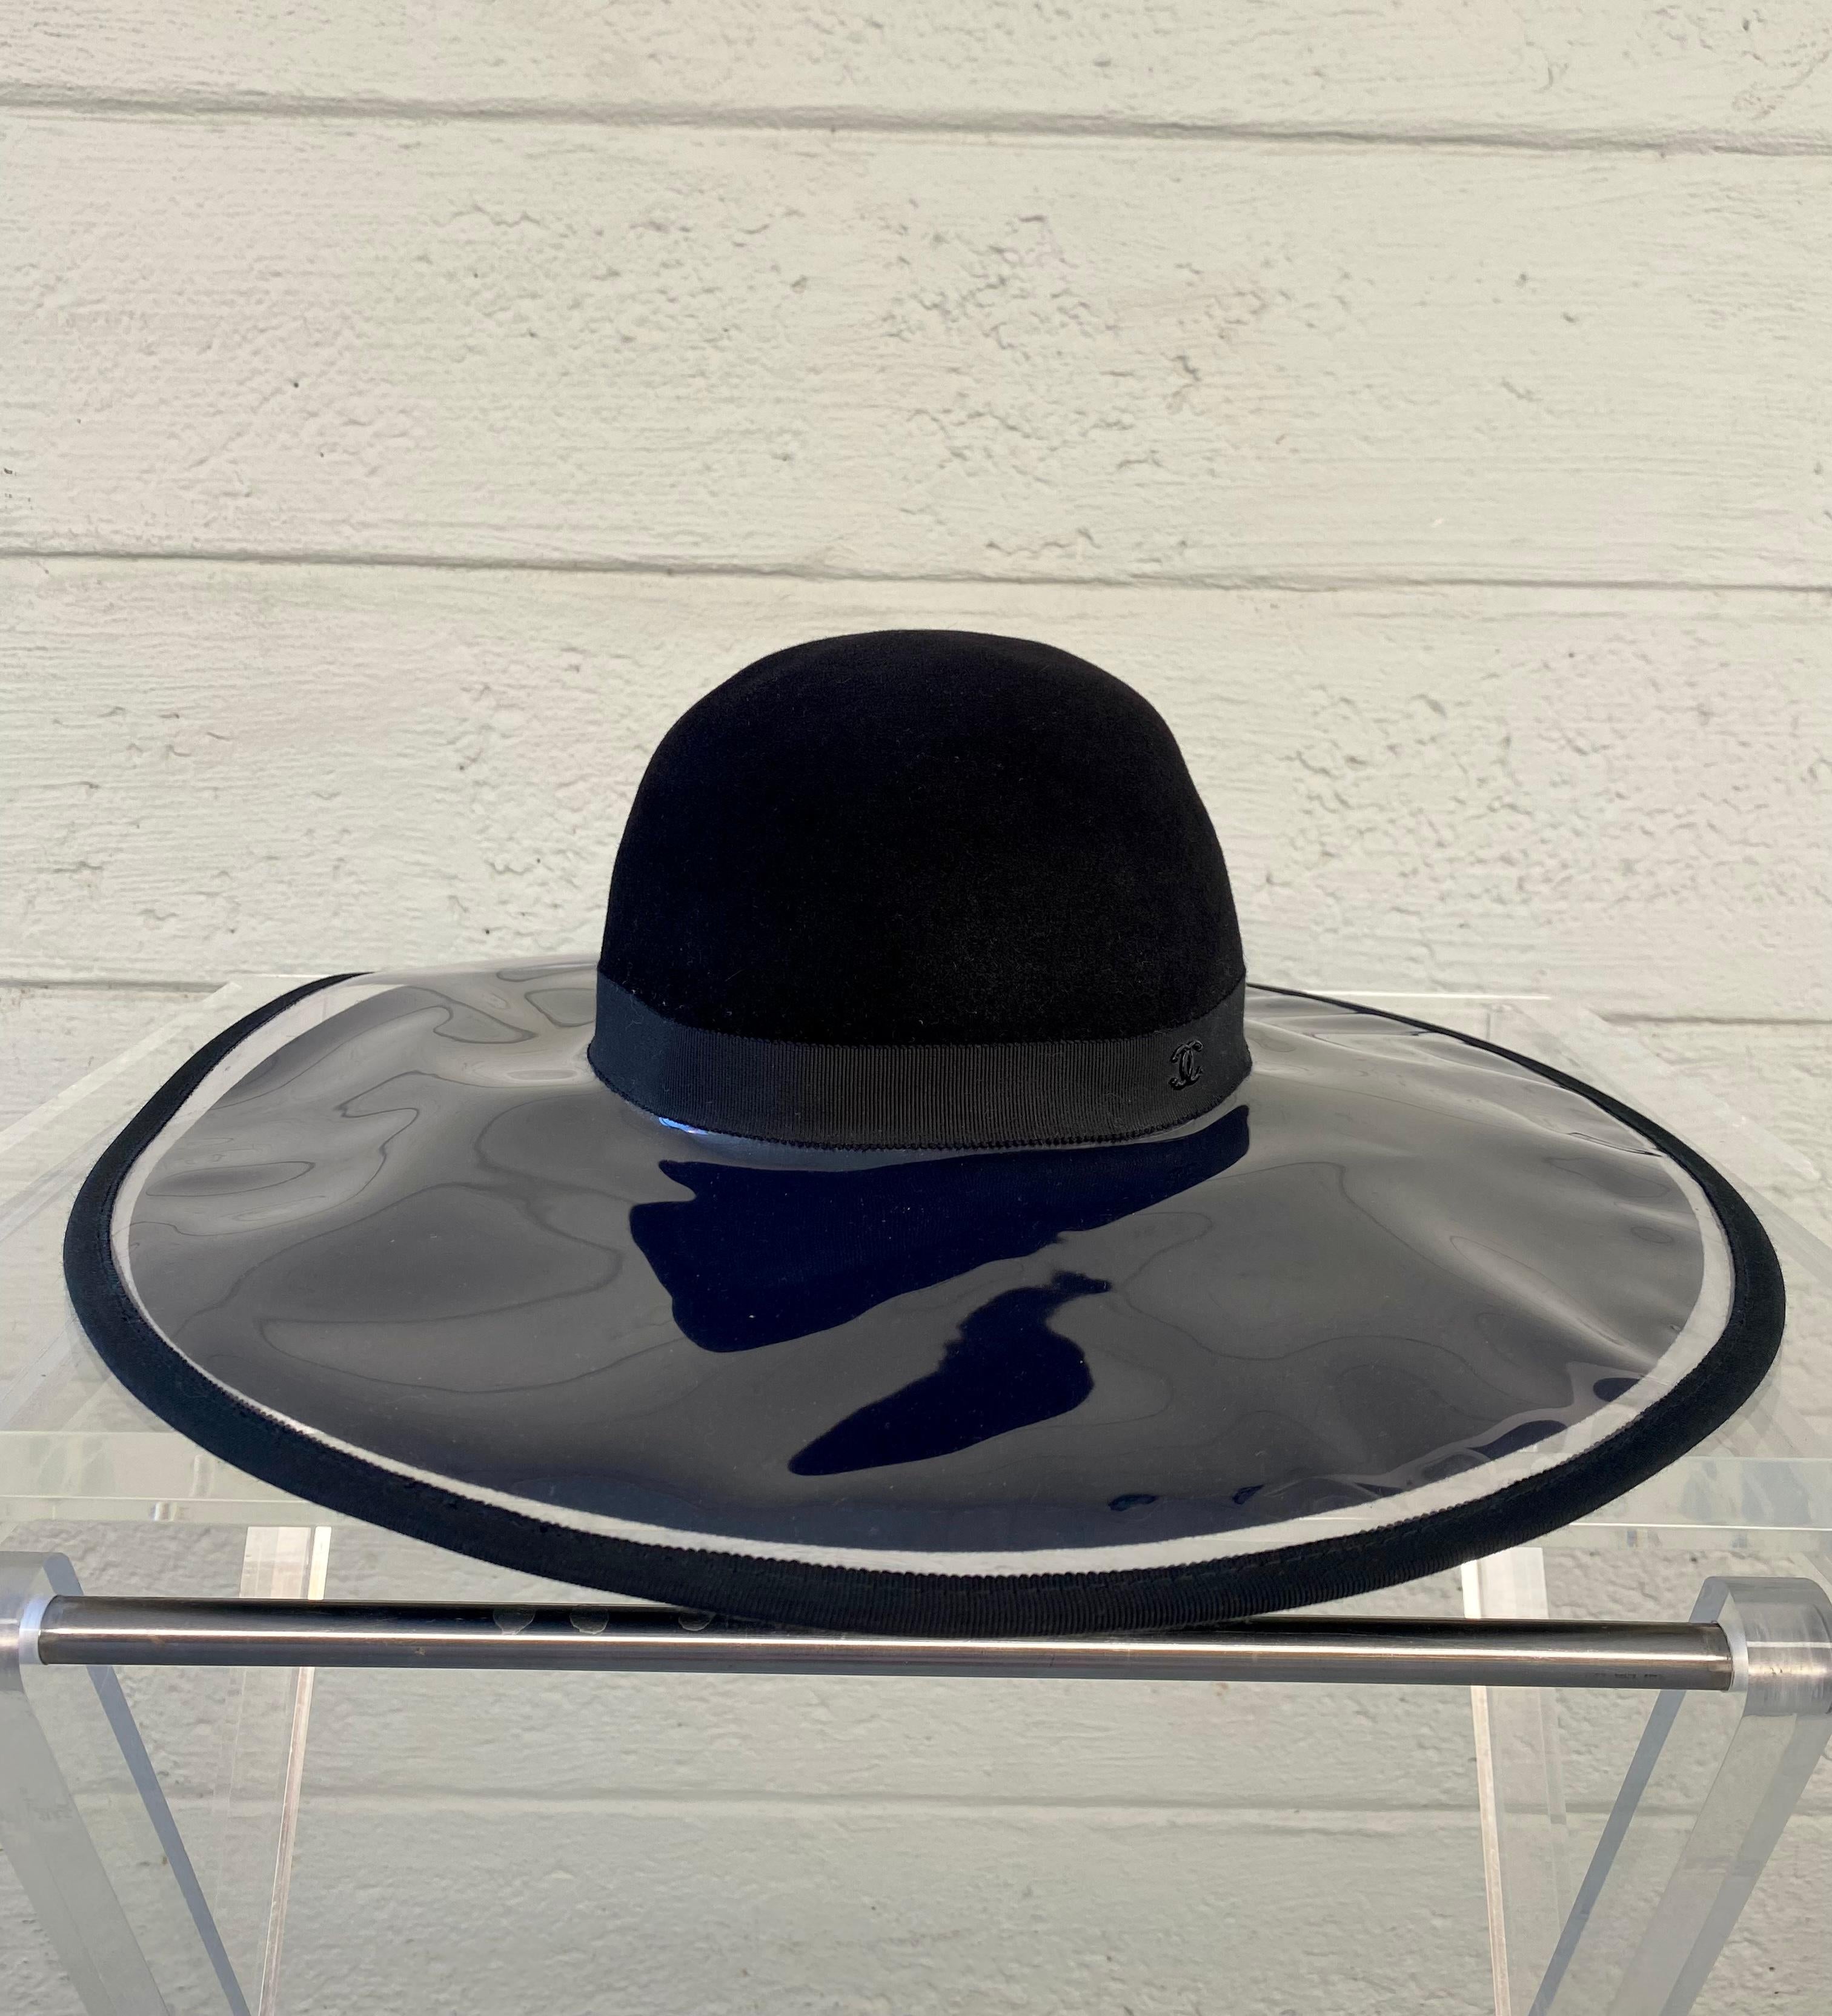 The ultimate in accessories making luxury craftsmanship. The Iconic House of Chanel always provides us with timeless and classic pieces. This beautiful hat takes timeless creation to a new level of sophistication and charm. Made from the finest